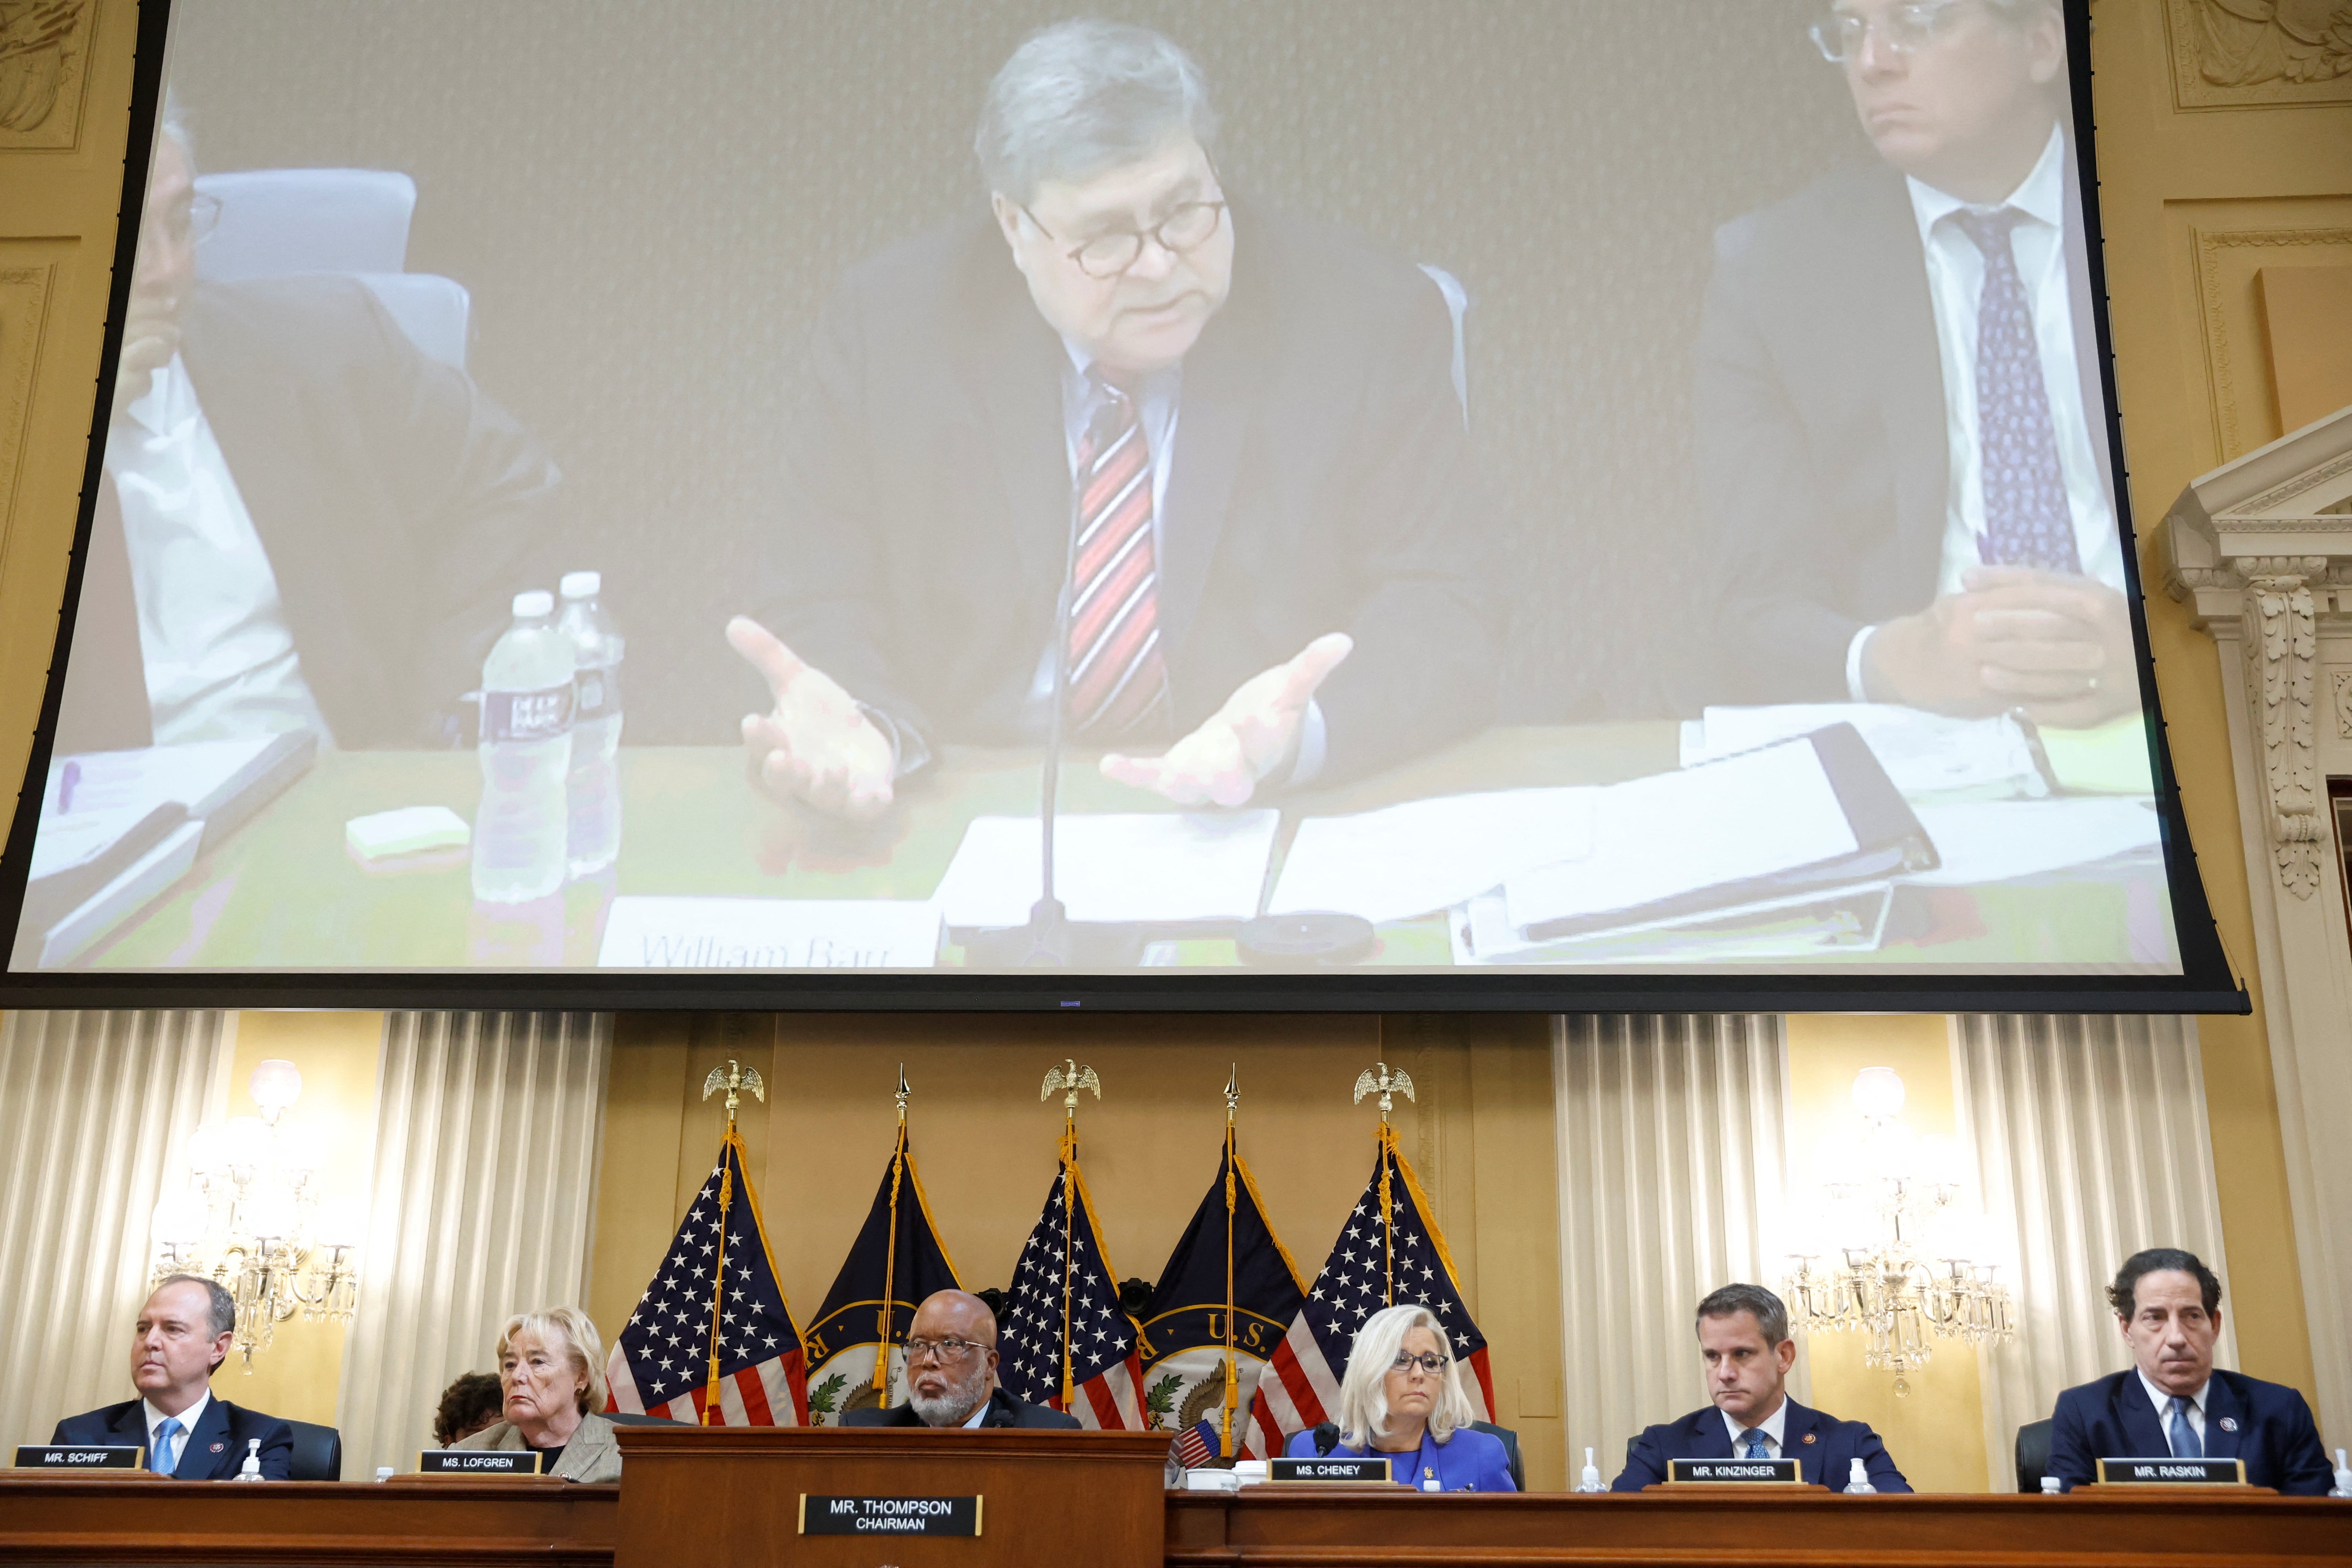 Former U.S. Attorney General Bill Barr is seen on video during his deposition for the public hearing of the U.S. House Select Committee to Investigate the January 6 Attack on the United States Capitol, on Capitol Hill in Washington, U.S., June 9, 2022. REUTERS/Jonathan Ernst